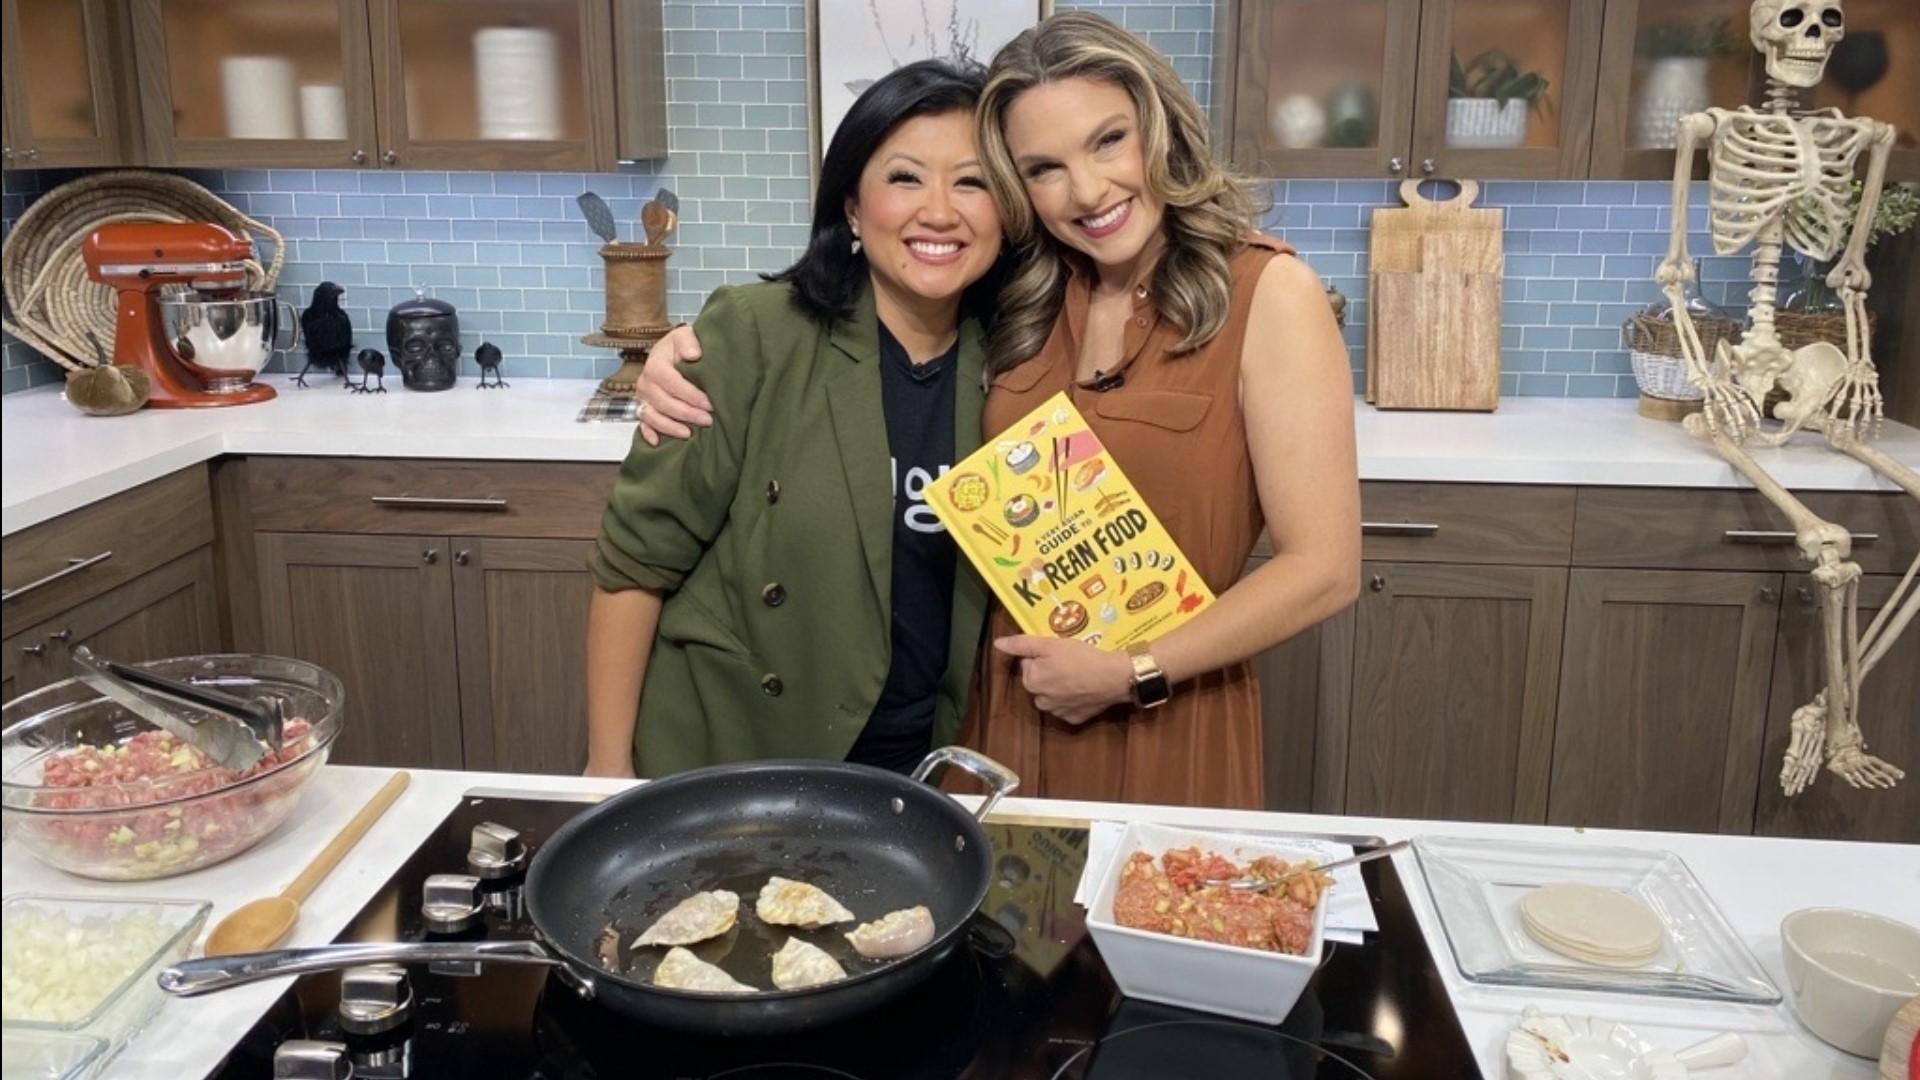 Former KING 5 anchor Michelle Li is back in town and treats us to a sneak peek of her new book "A Very Asian Guide to Korean Food." #newdaynw